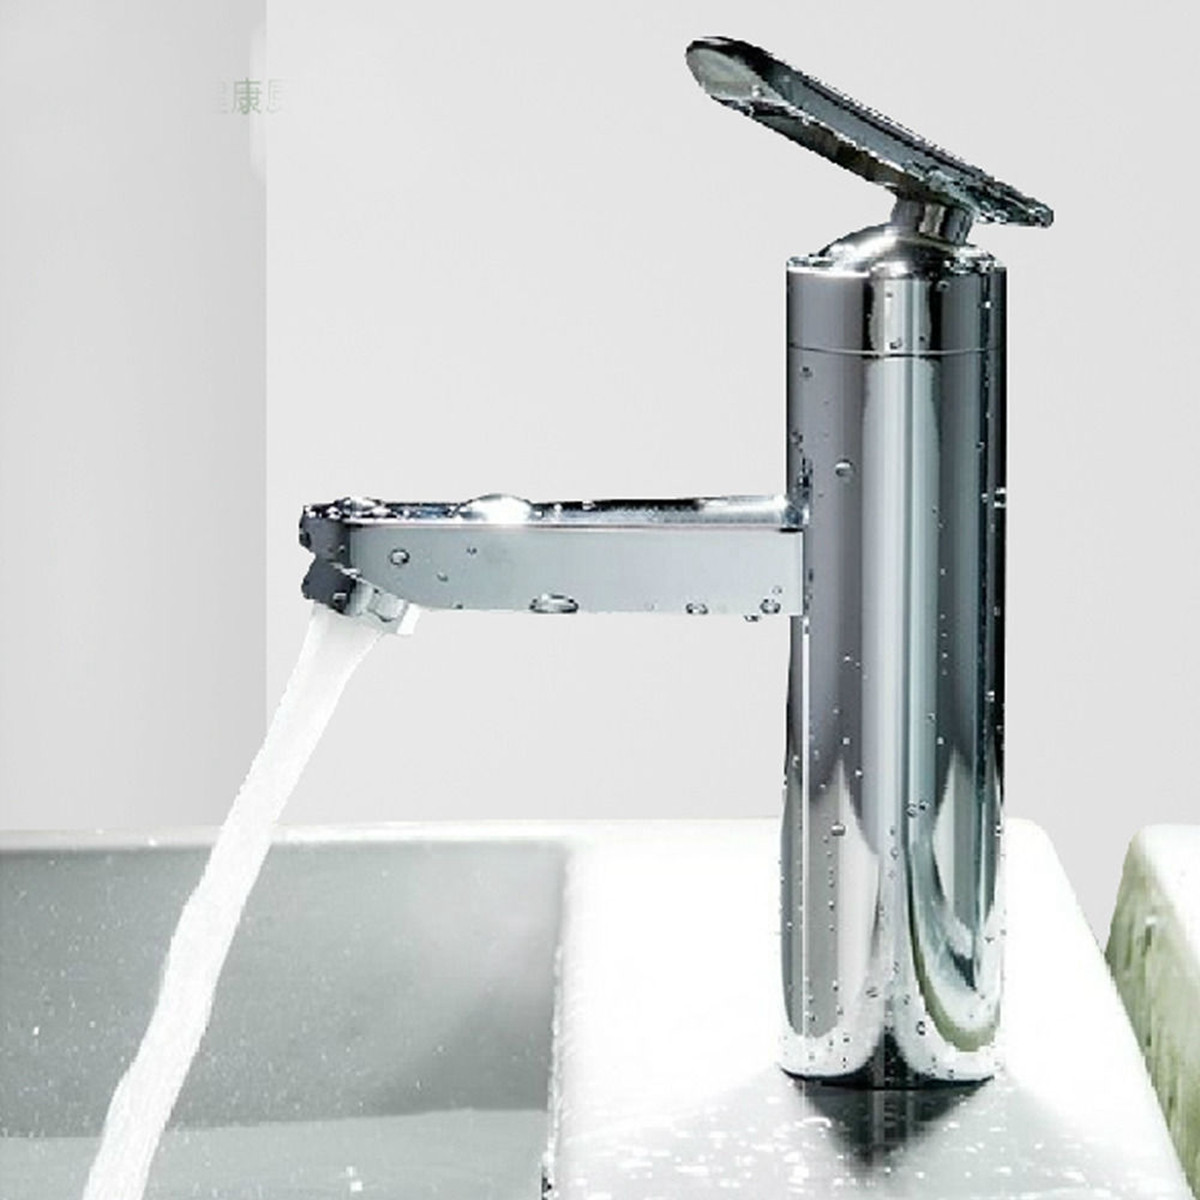 Bathroom-Kitchen-Wash-Basin-Faucet-Two-Hole-HotampCold-Mixer-Water-Taps-1178900